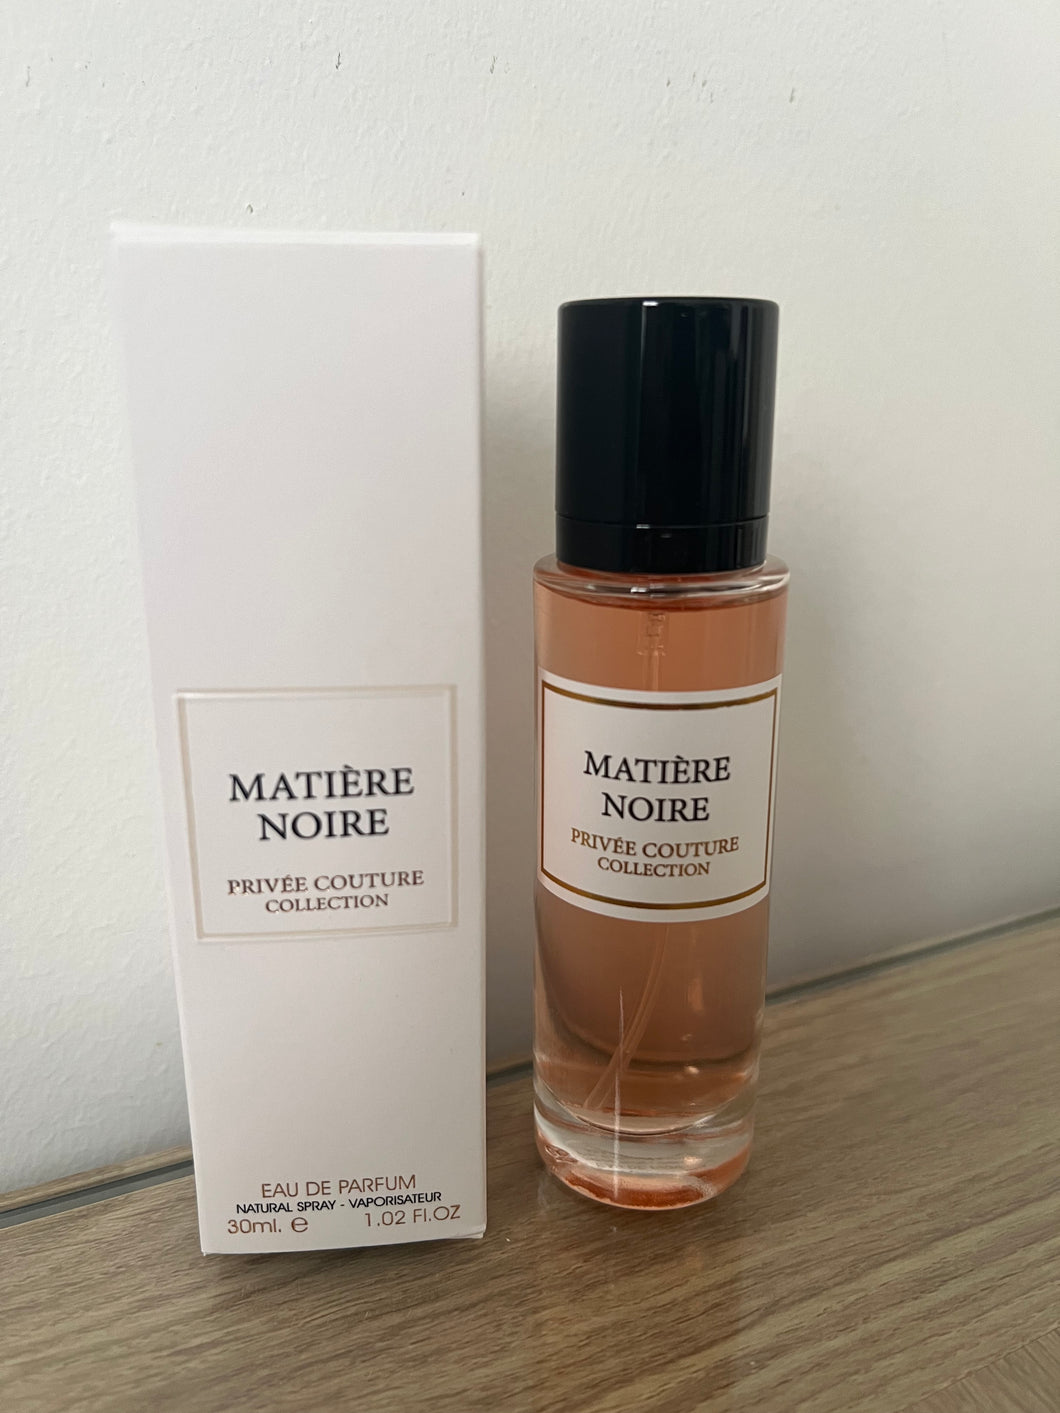 Matiere Noire 30ml EDP Privee Couture Collection